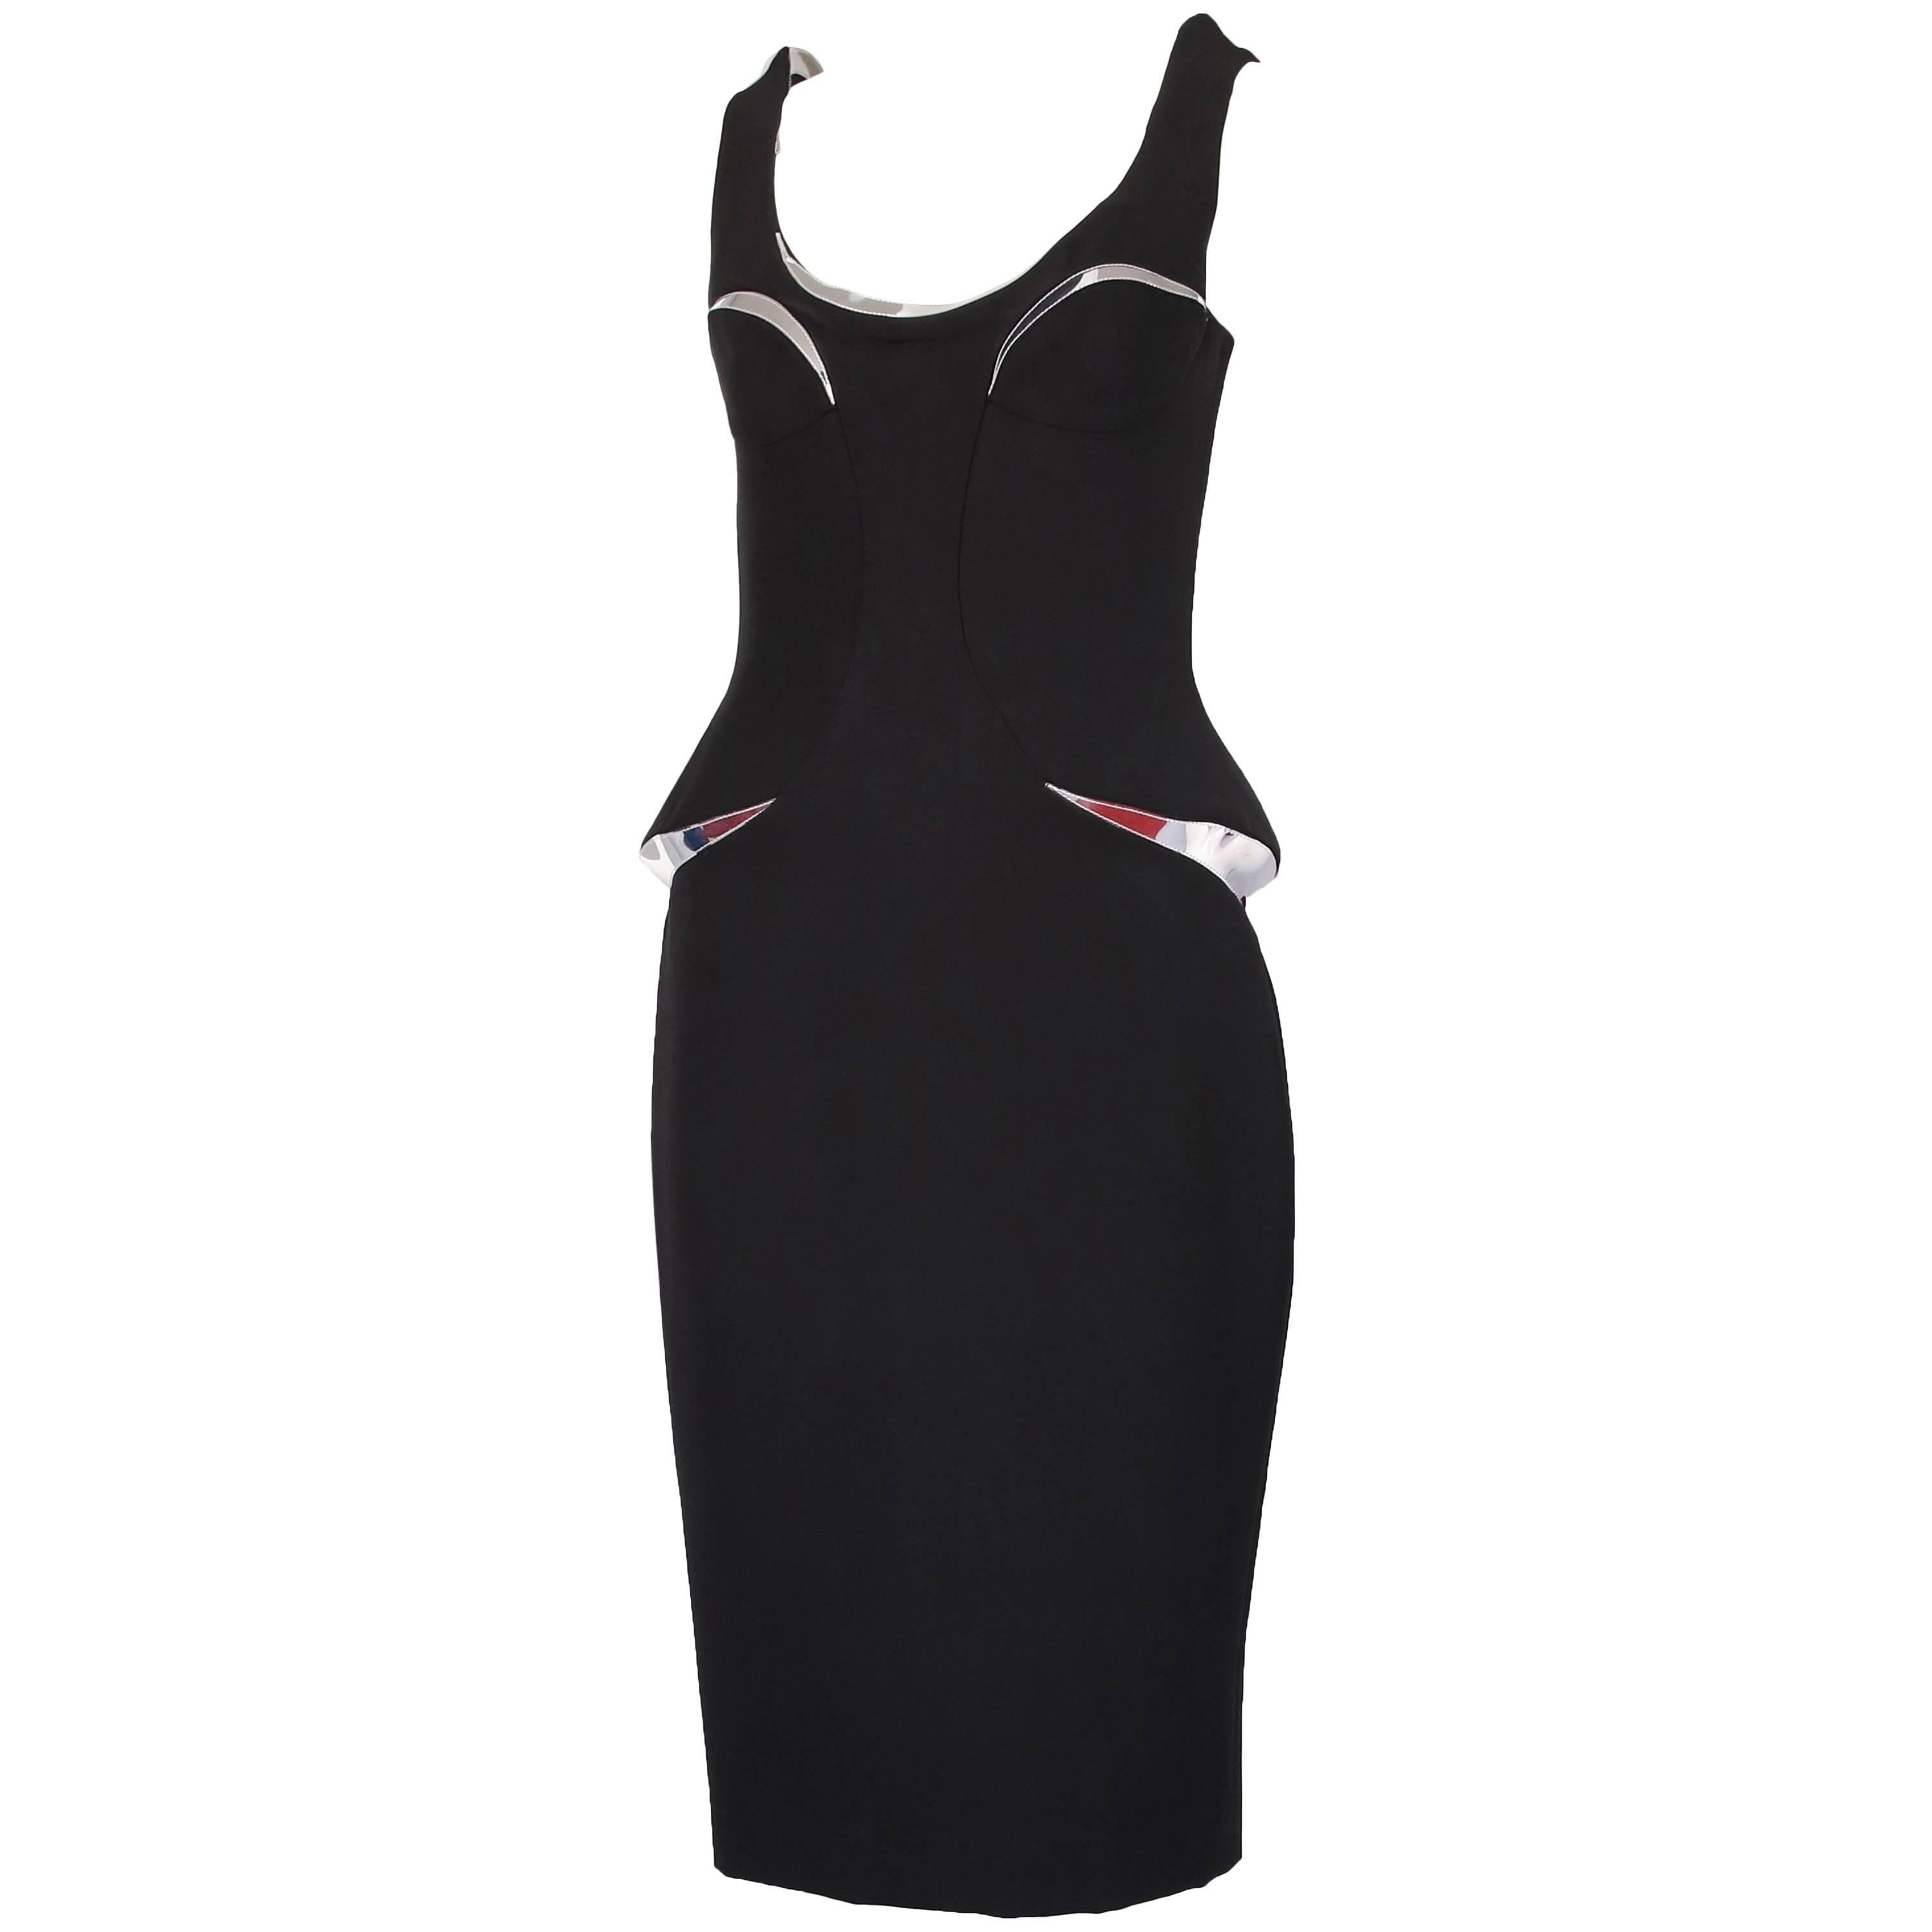 Versace Bodycon Black Mini Dress w/Silver Insets - New With Tags For Sale